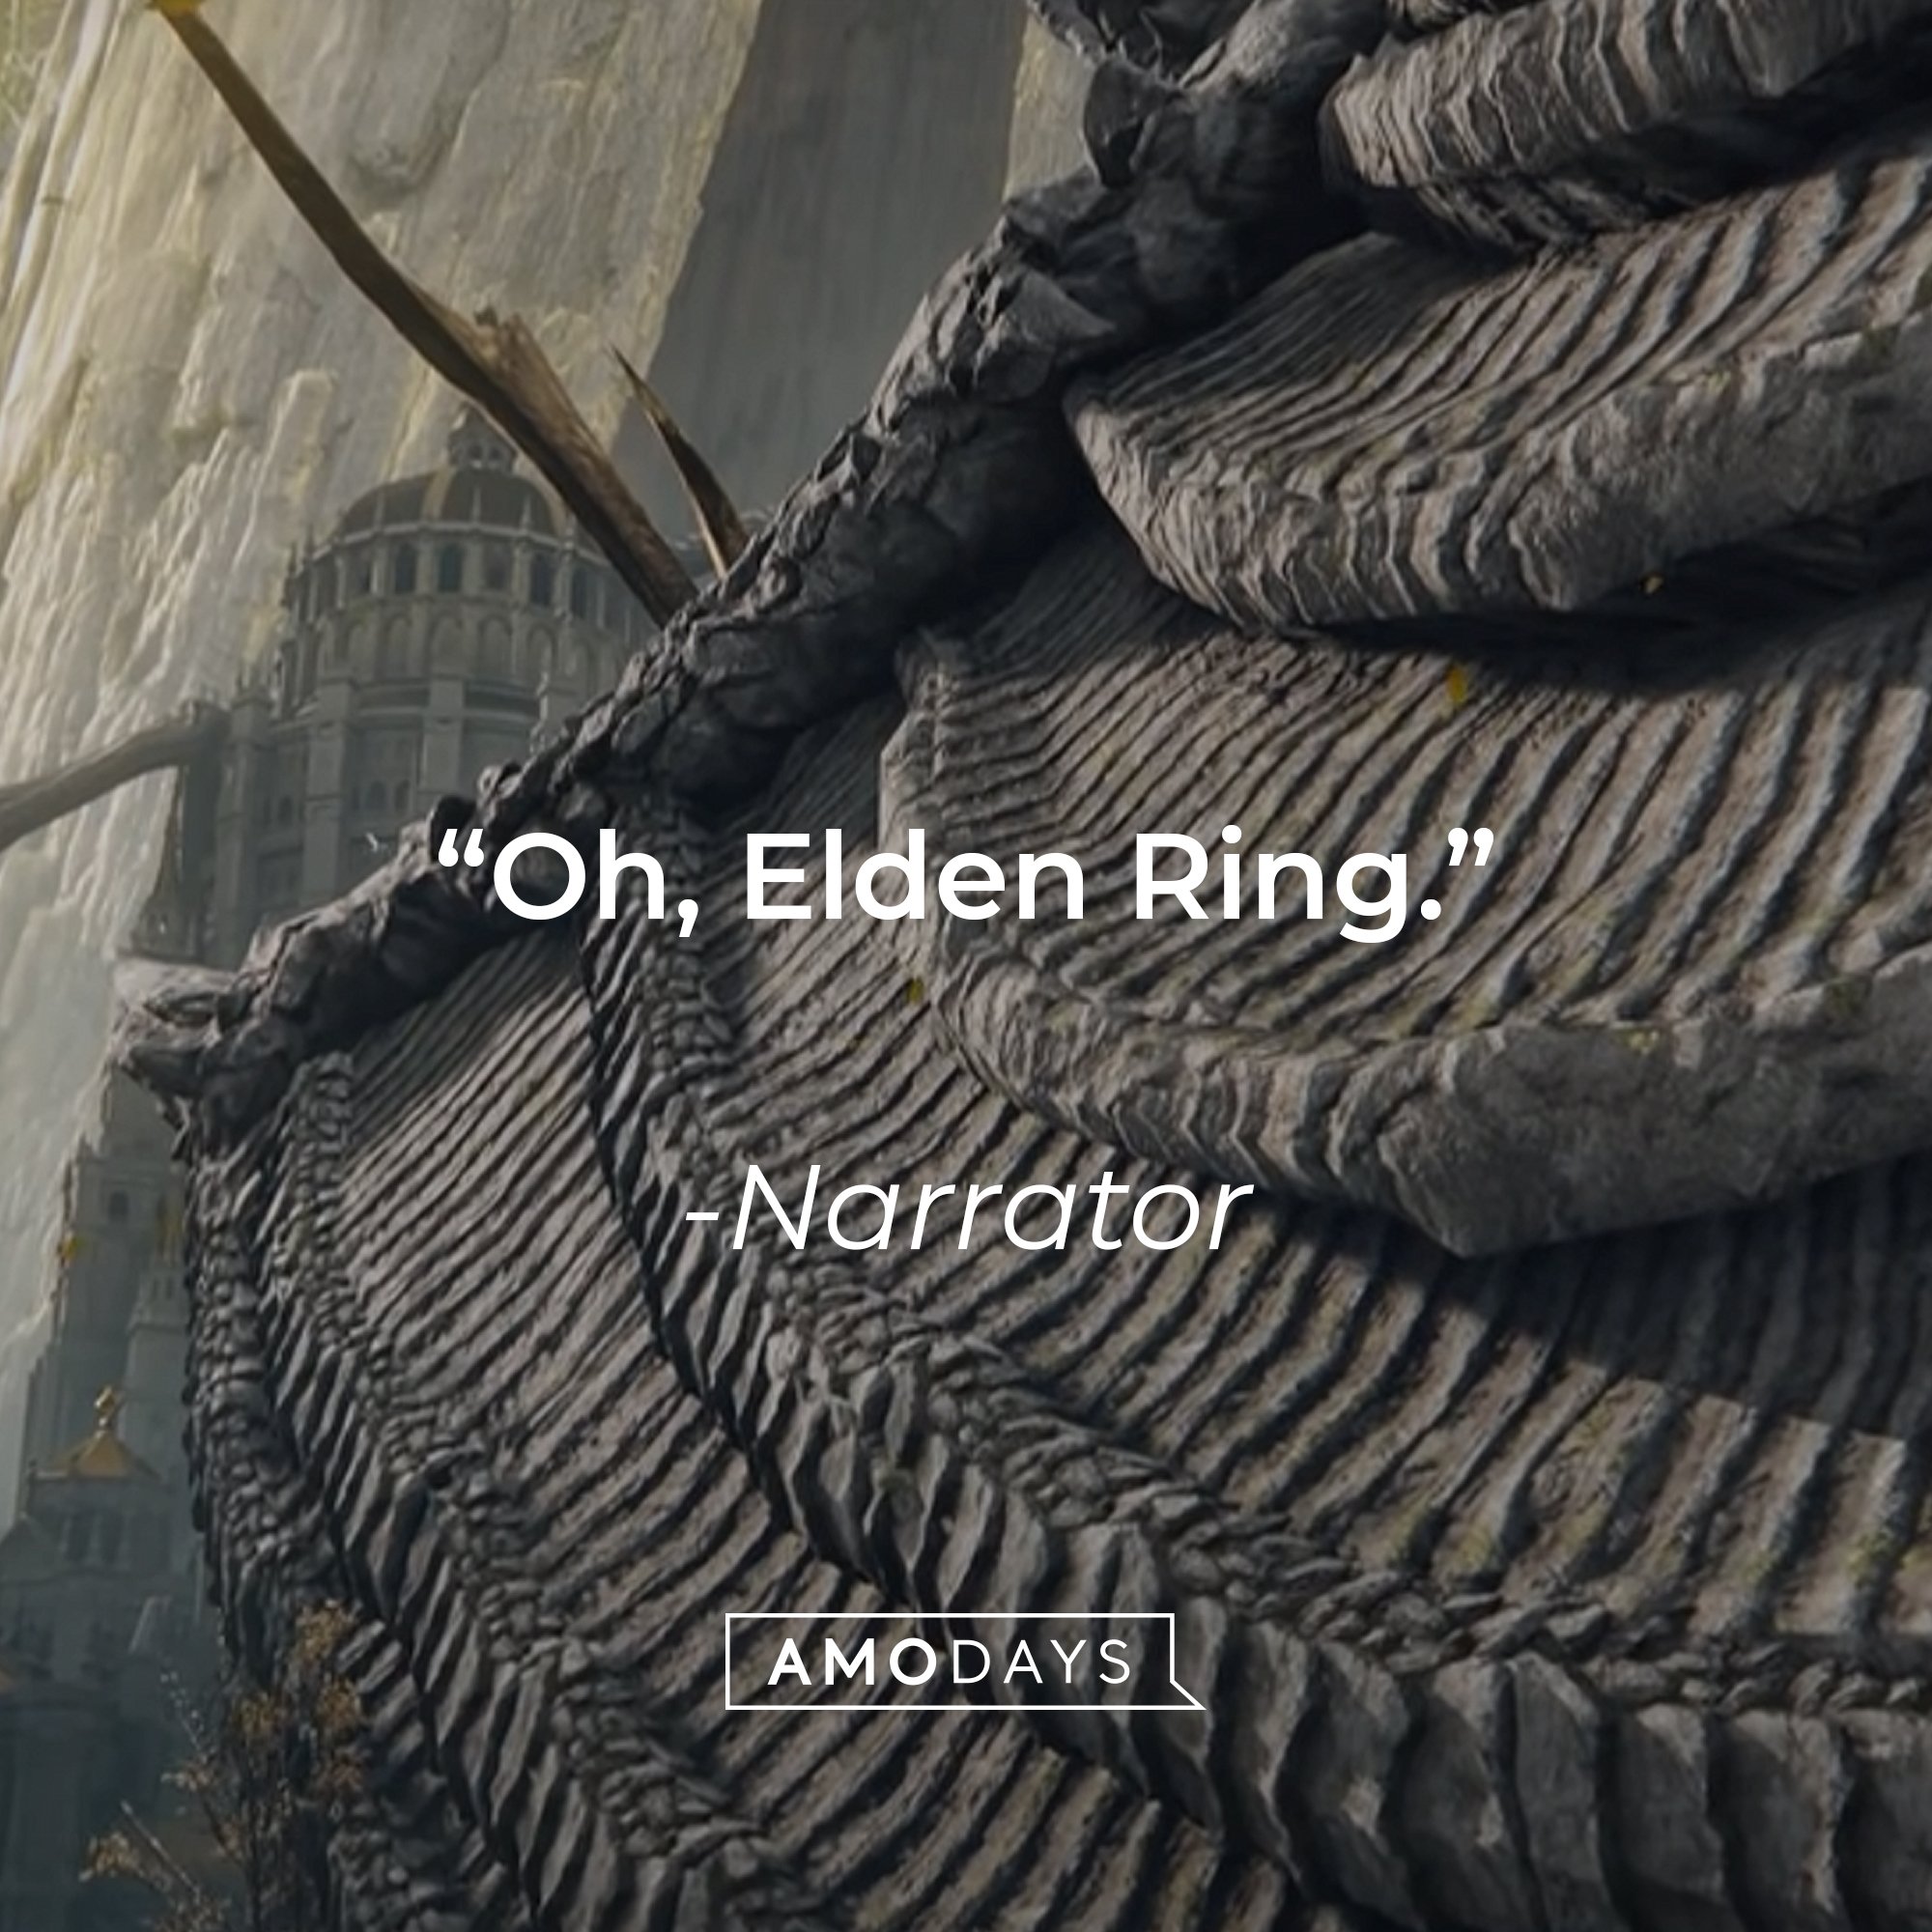 Narrator’s quote: "Oh, Elden Ring." | Image: AmoDays